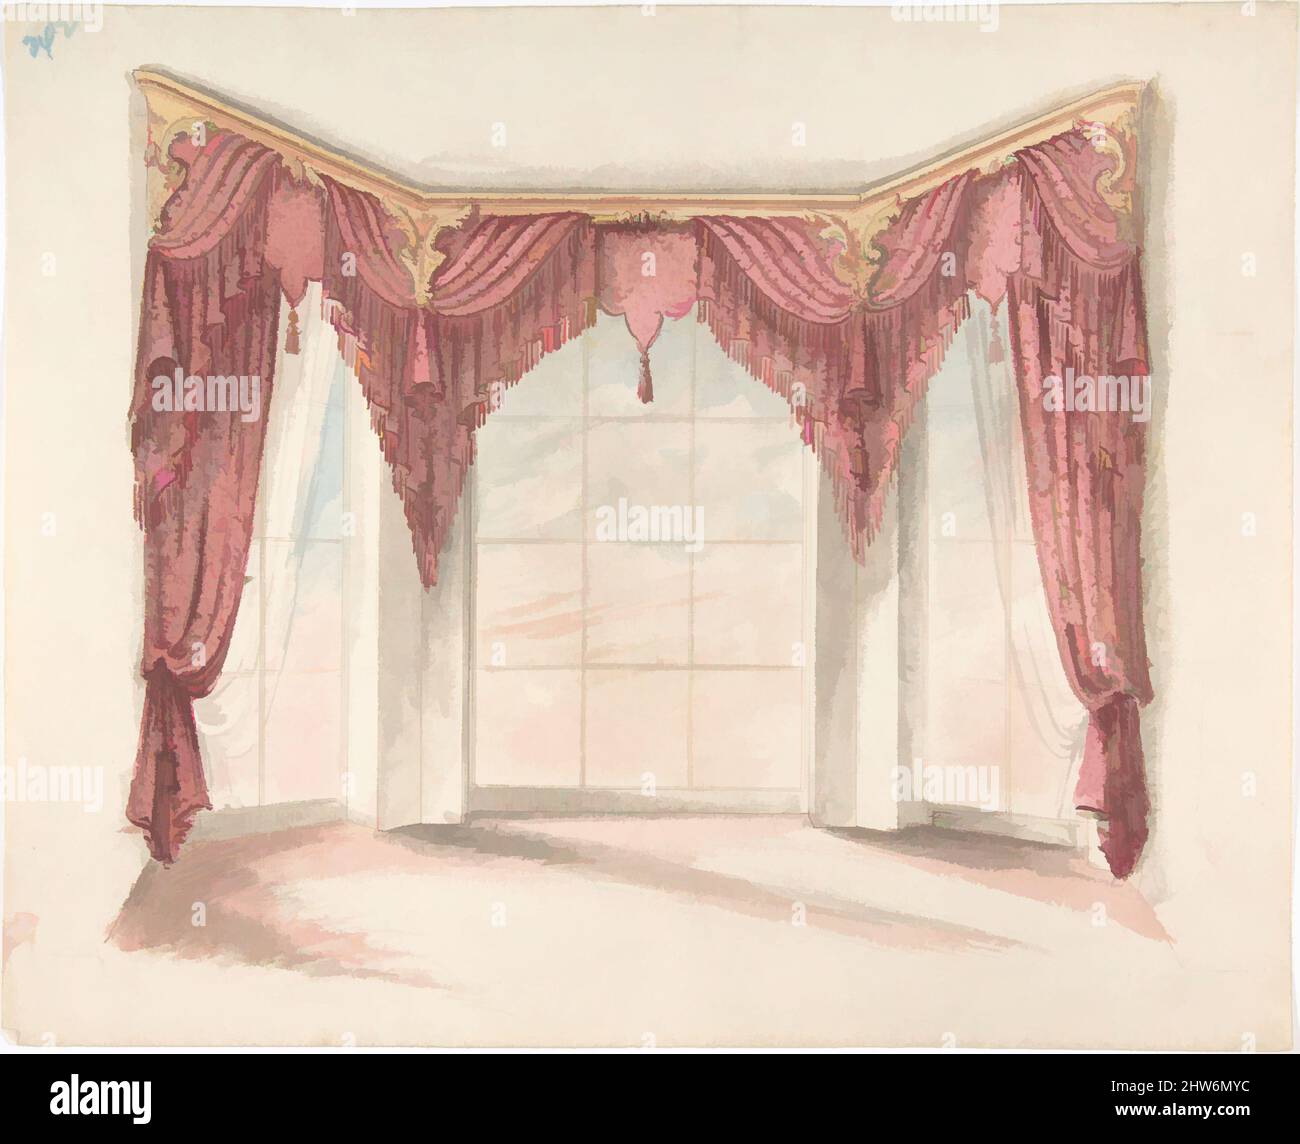 Art inspired by Design for Red Curtains with Red Fringes and a Gold Pediment, early 19th century, Ink, watercolor and wash, sheet: 9 1/2 x 11 13/16 in. (24.2 x 30 cm), Anonymous, British, 19th century, Classic works modernized by Artotop with a splash of modernity. Shapes, color and value, eye-catching visual impact on art. Emotions through freedom of artworks in a contemporary way. A timeless message pursuing a wildly creative new direction. Artists turning to the digital medium and creating the Artotop NFT Stock Photo